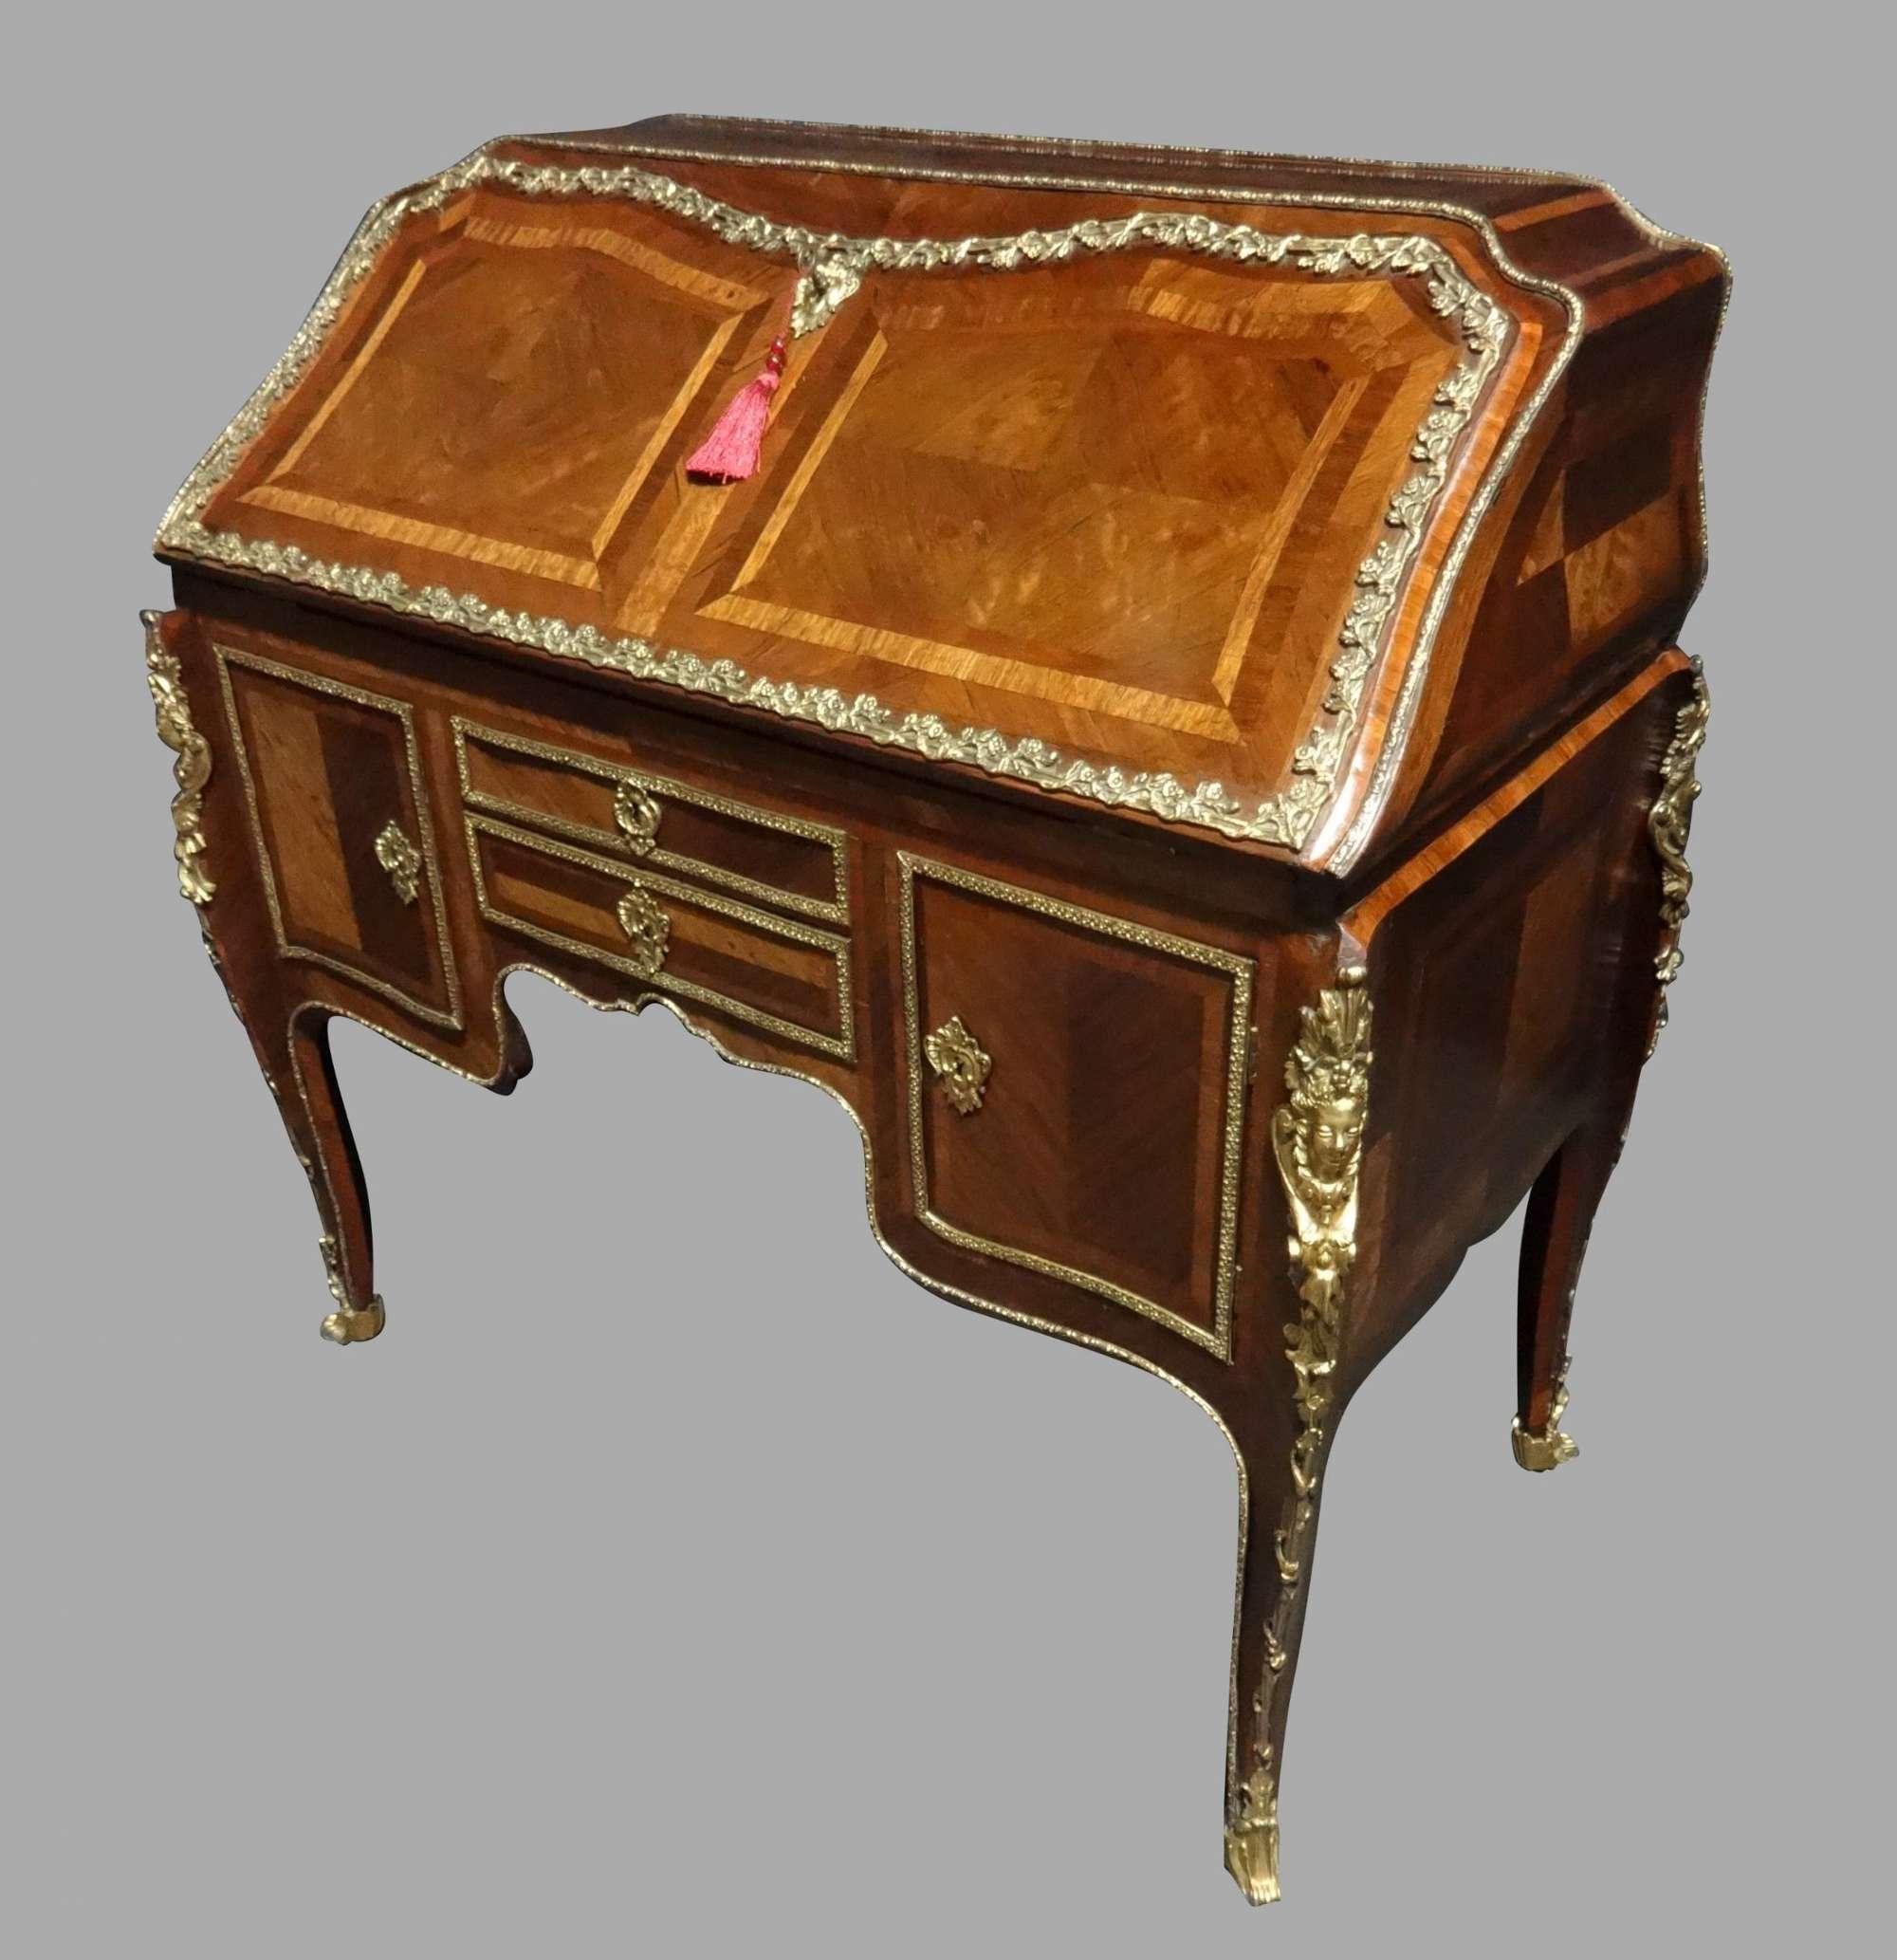 Excellent  Quality Early 19thc. French Kingwood Parquetry Bureau